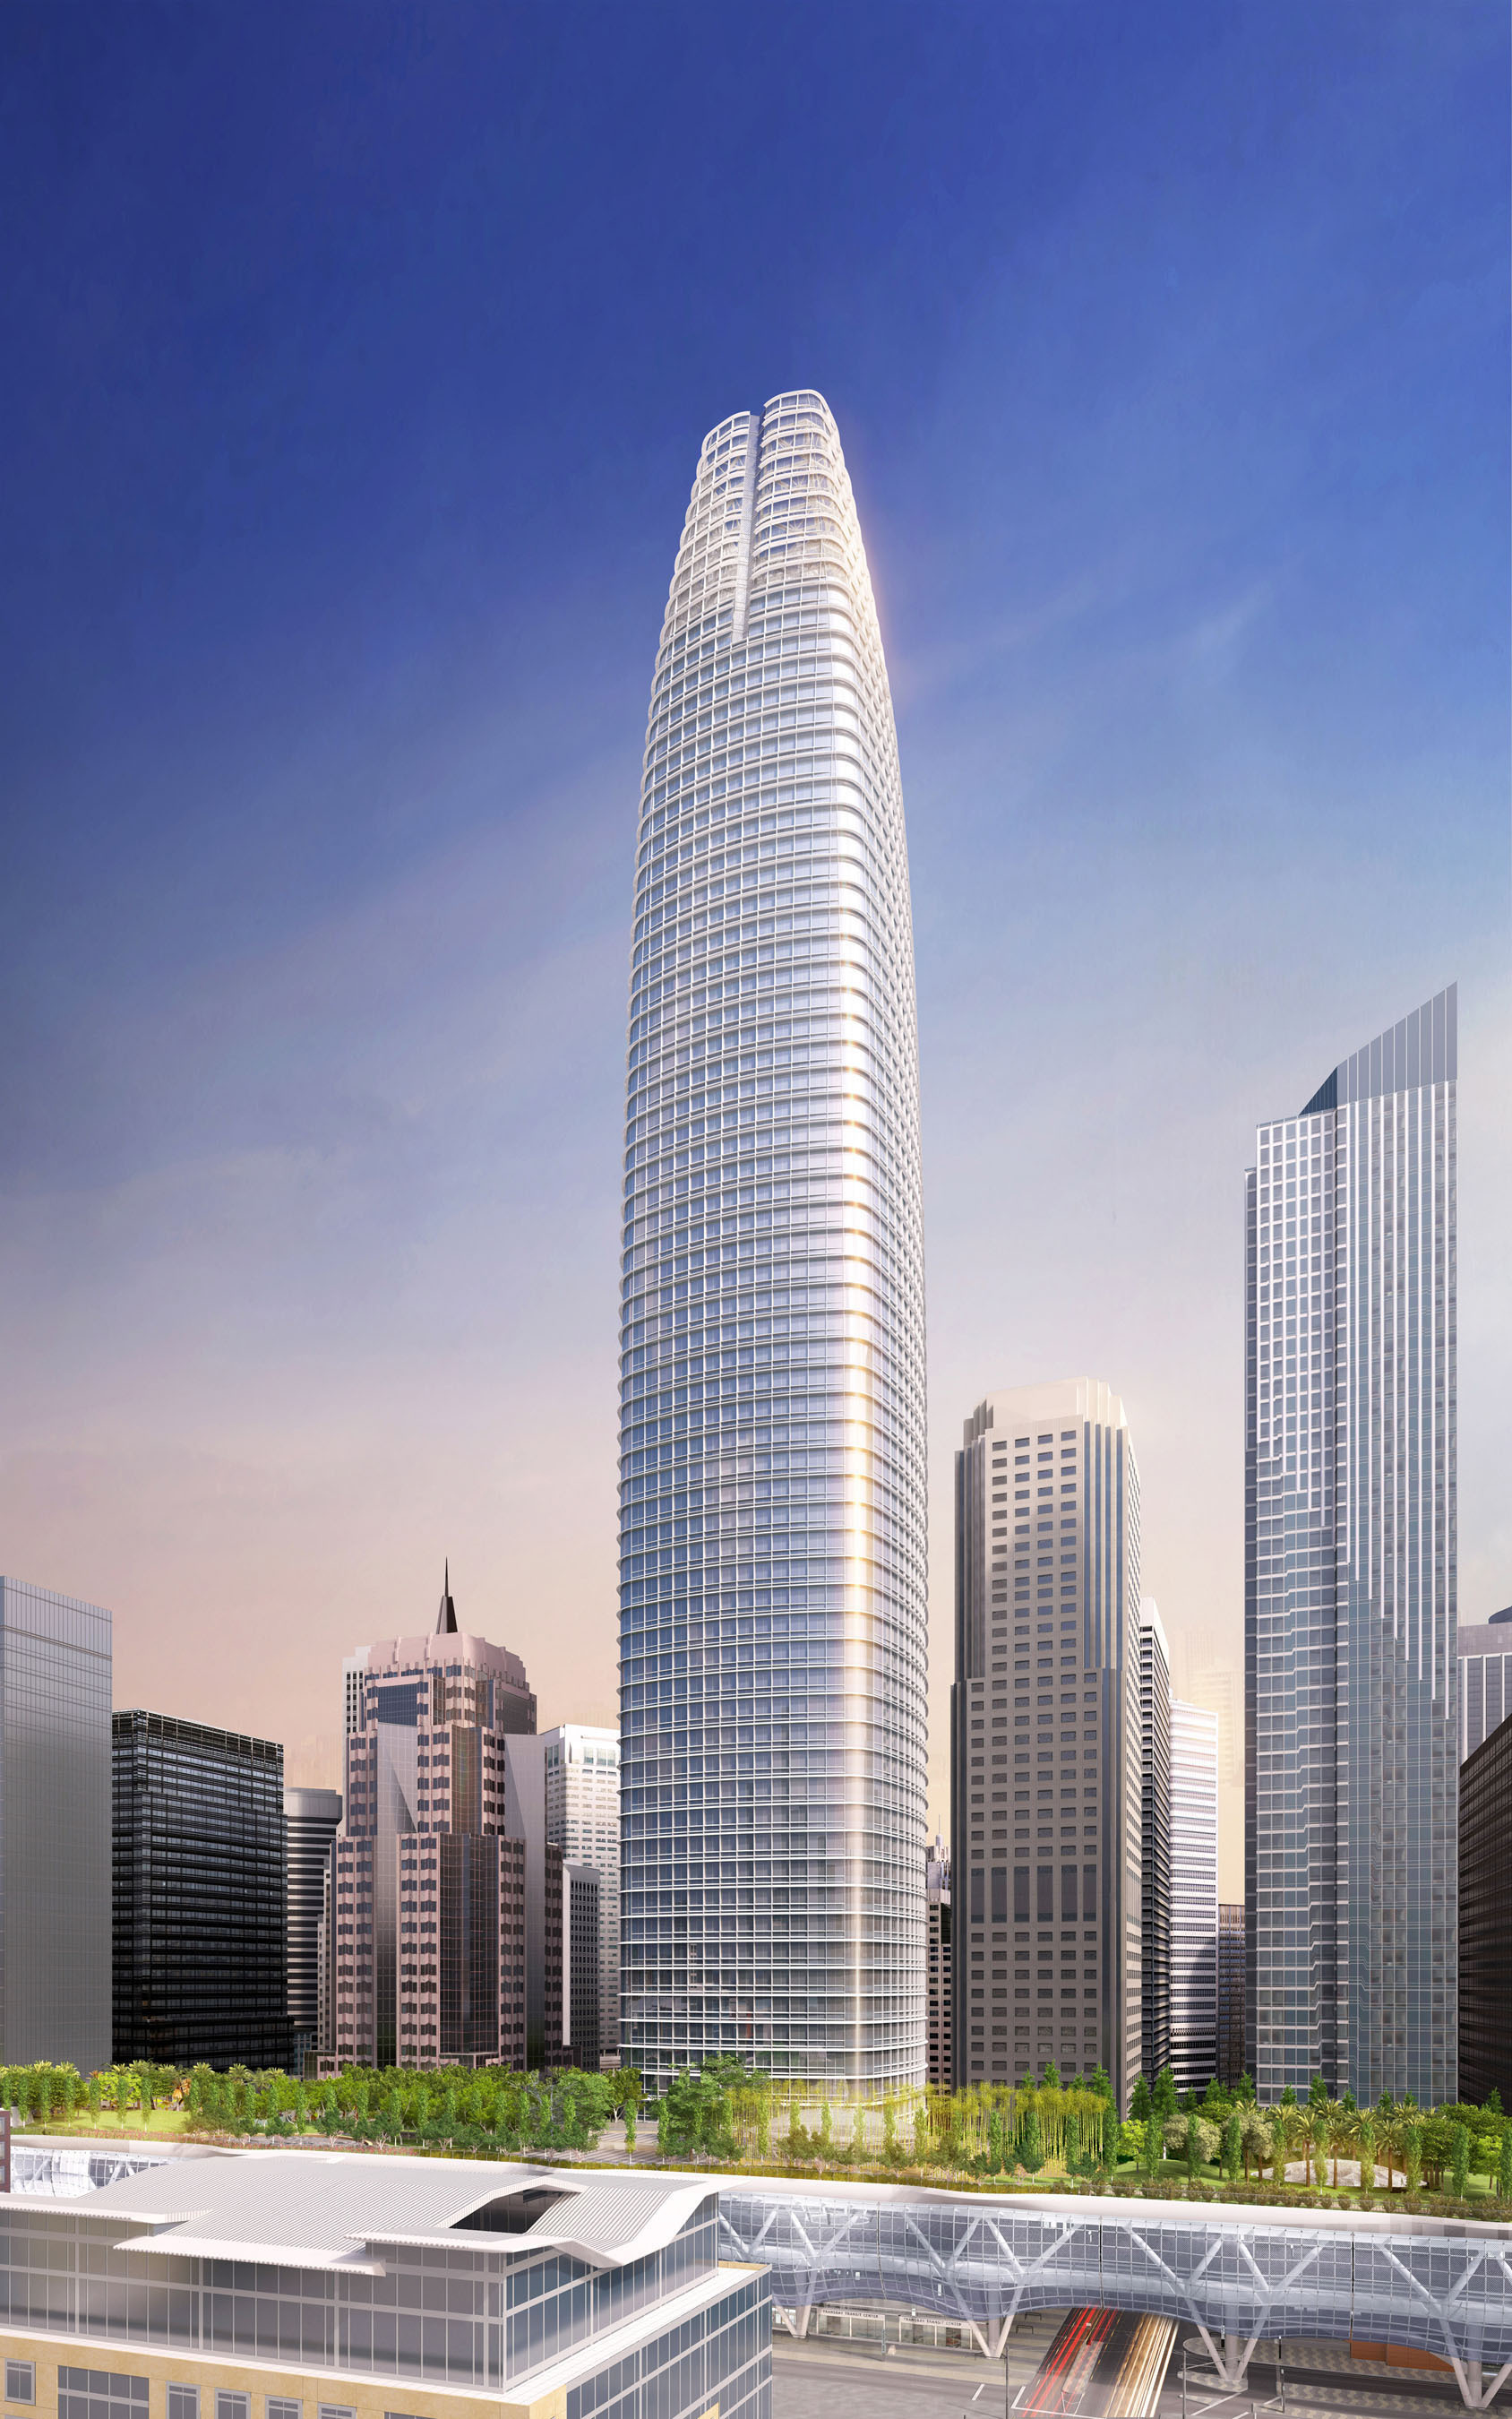 Transbay Transit Tower, designed by Pelli Clarke Pelli Architects, will be the tallest building in San Francisco. Officials ceremonially broke ground for the tower Wednesday. (PRNewsFoto/Pelli Clarke Pelli Architects) (PRNewsFoto/PELLI CLARKE PELLI ARCHITECTS)